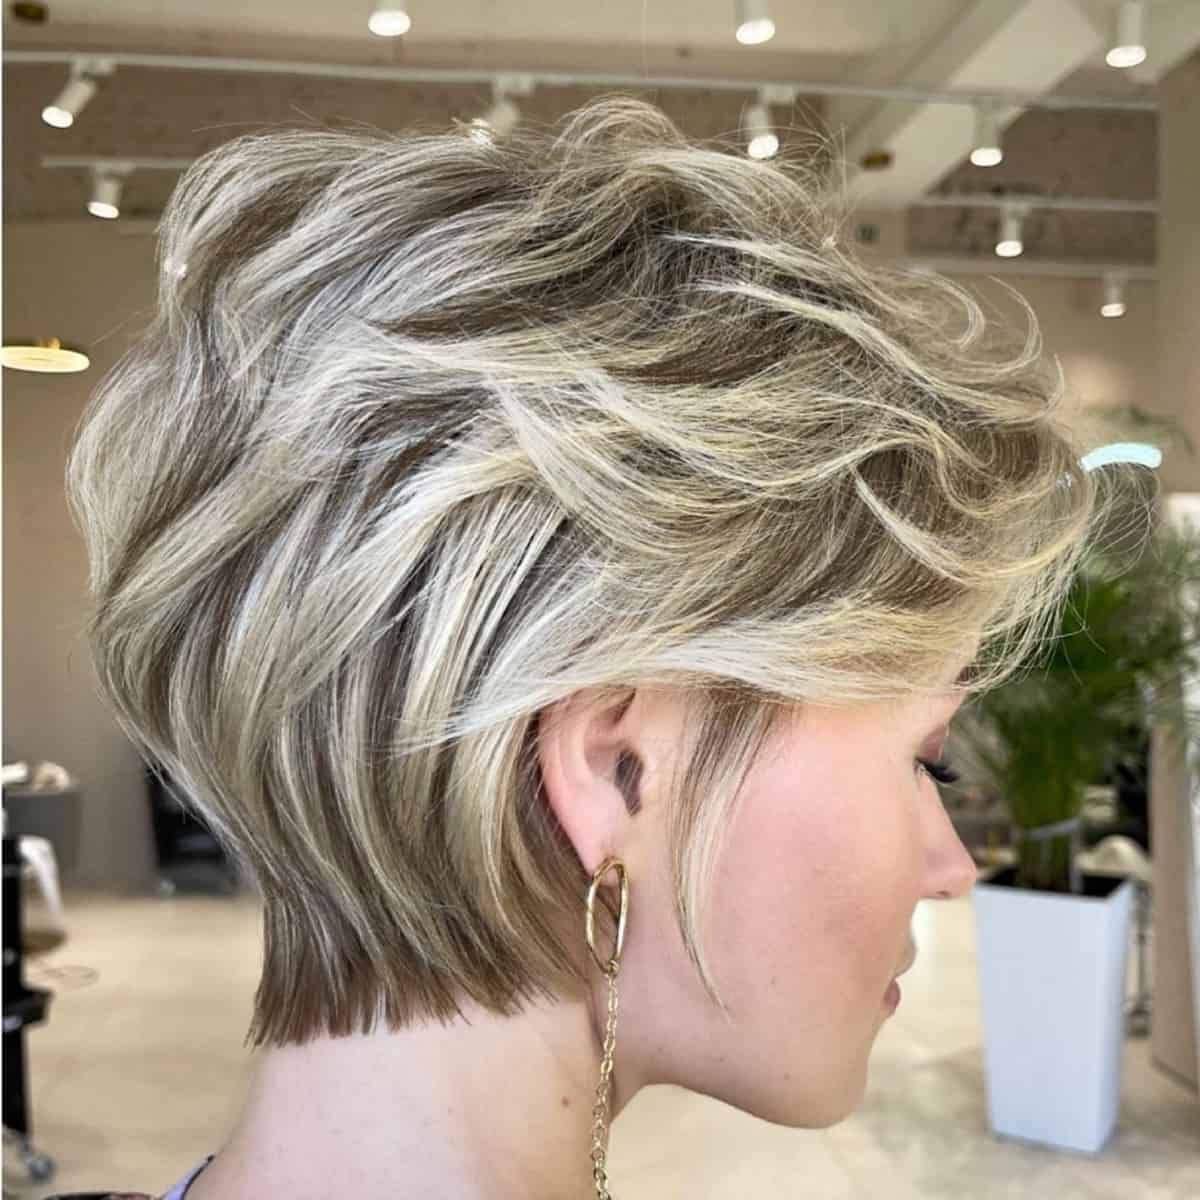 26 Cutest Pixie Cuts For Wavy Hair That Are Trending Right Now Regarding Voluminous Pixie Hairstyles With Wavy Texture (View 3 of 20)